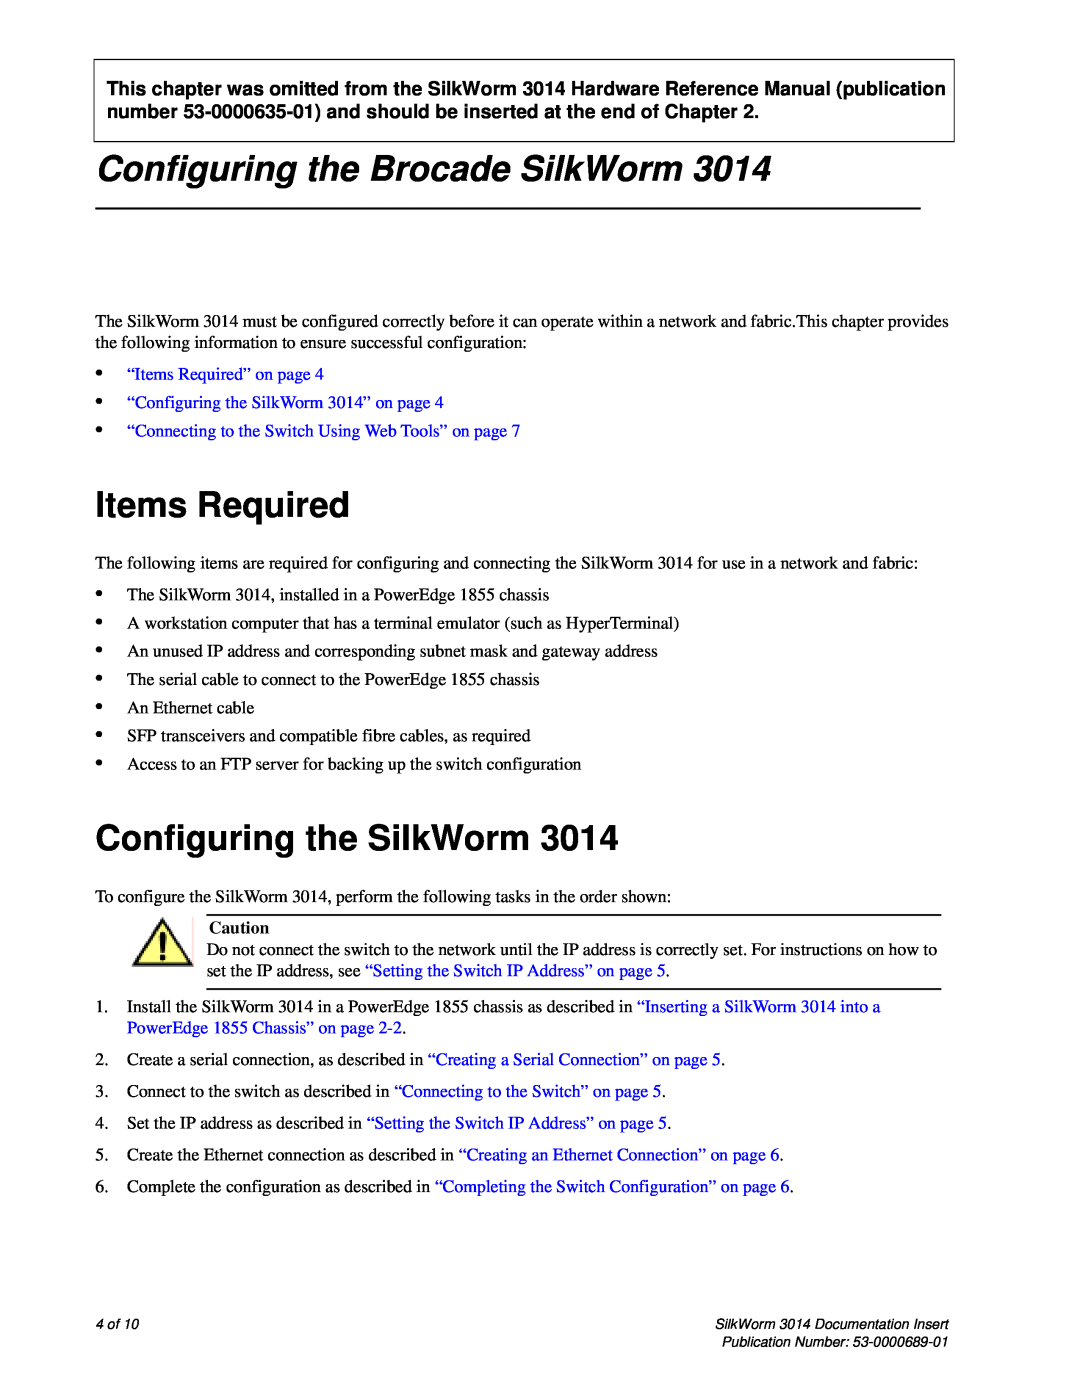 Brocade Communications Systems 3014 quick start Items Required, Configuring the SilkWorm, Configuring the Brocade SilkWorm 